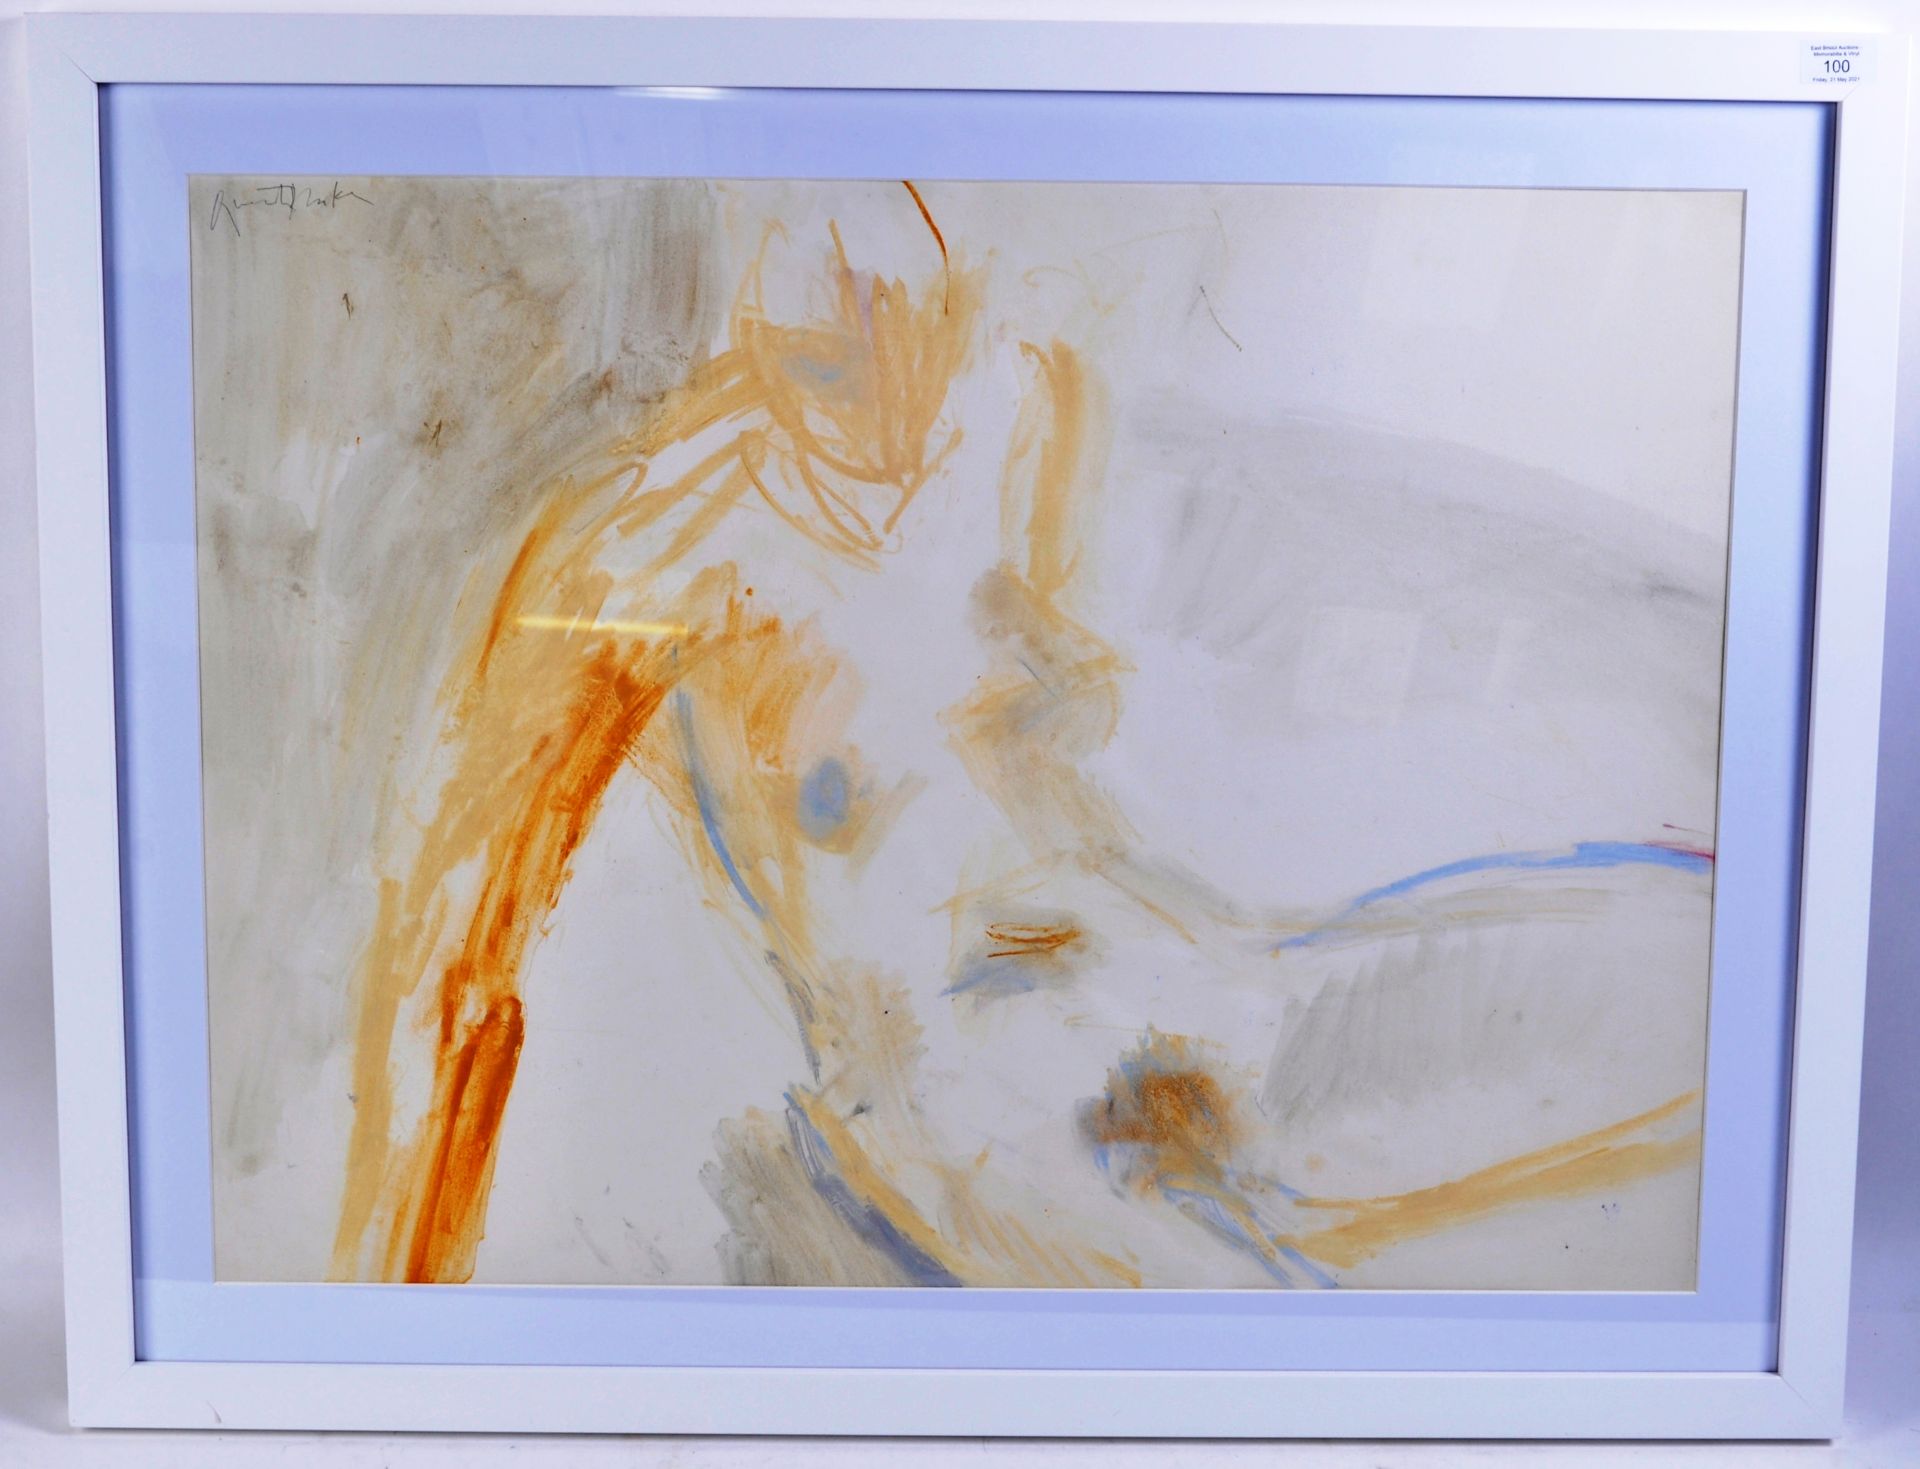 SIR QUENTIN BLAKE - NUDE - ORIGINAL WATERCOLOUR PAINTING STUDY - Image 8 of 9